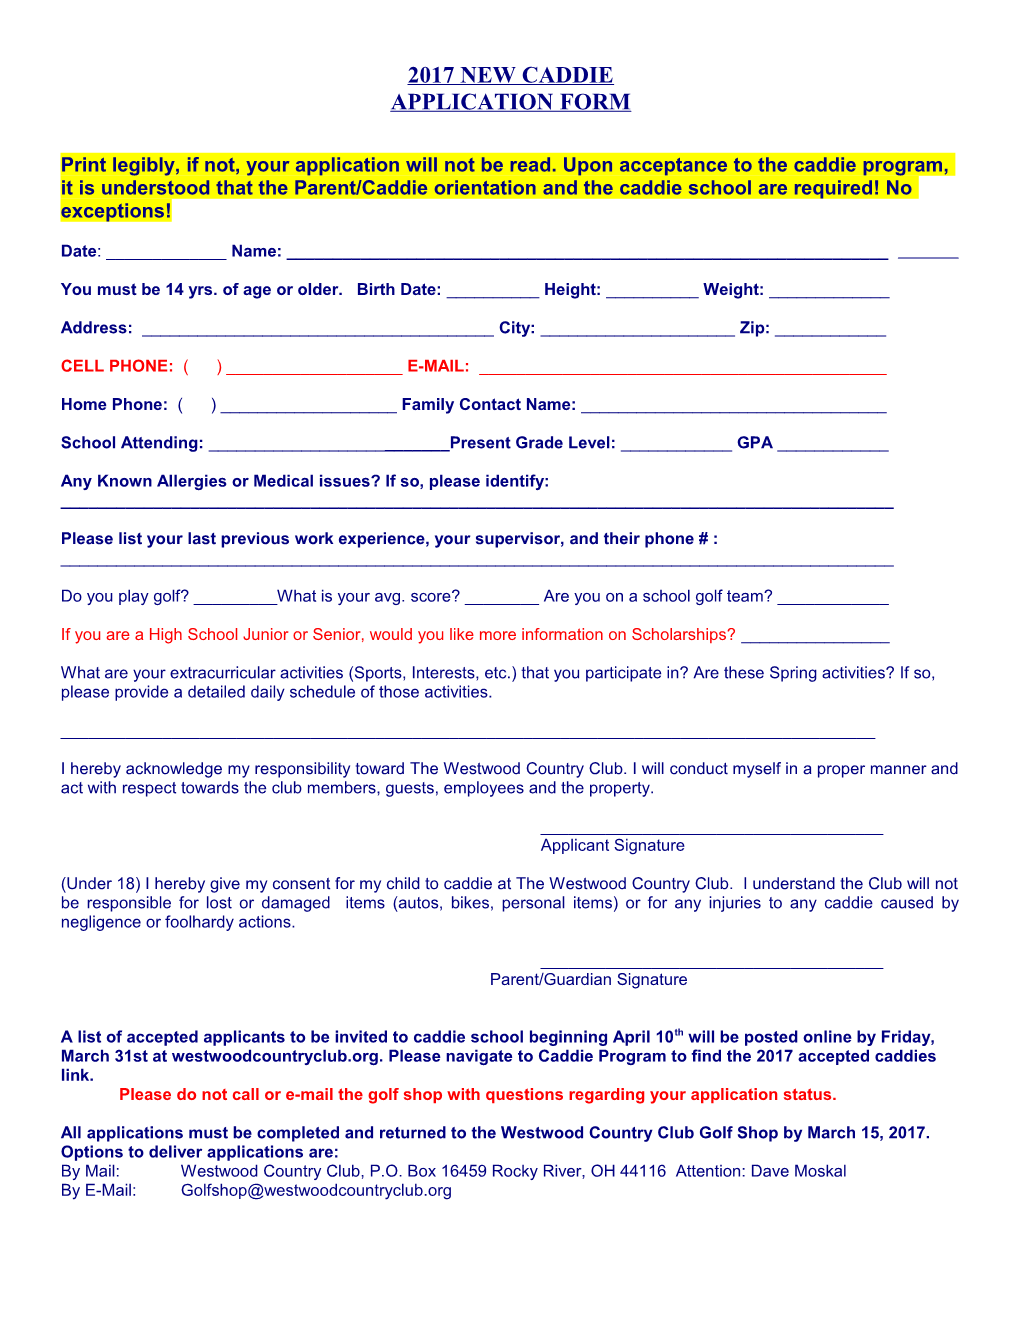 Application Form s44